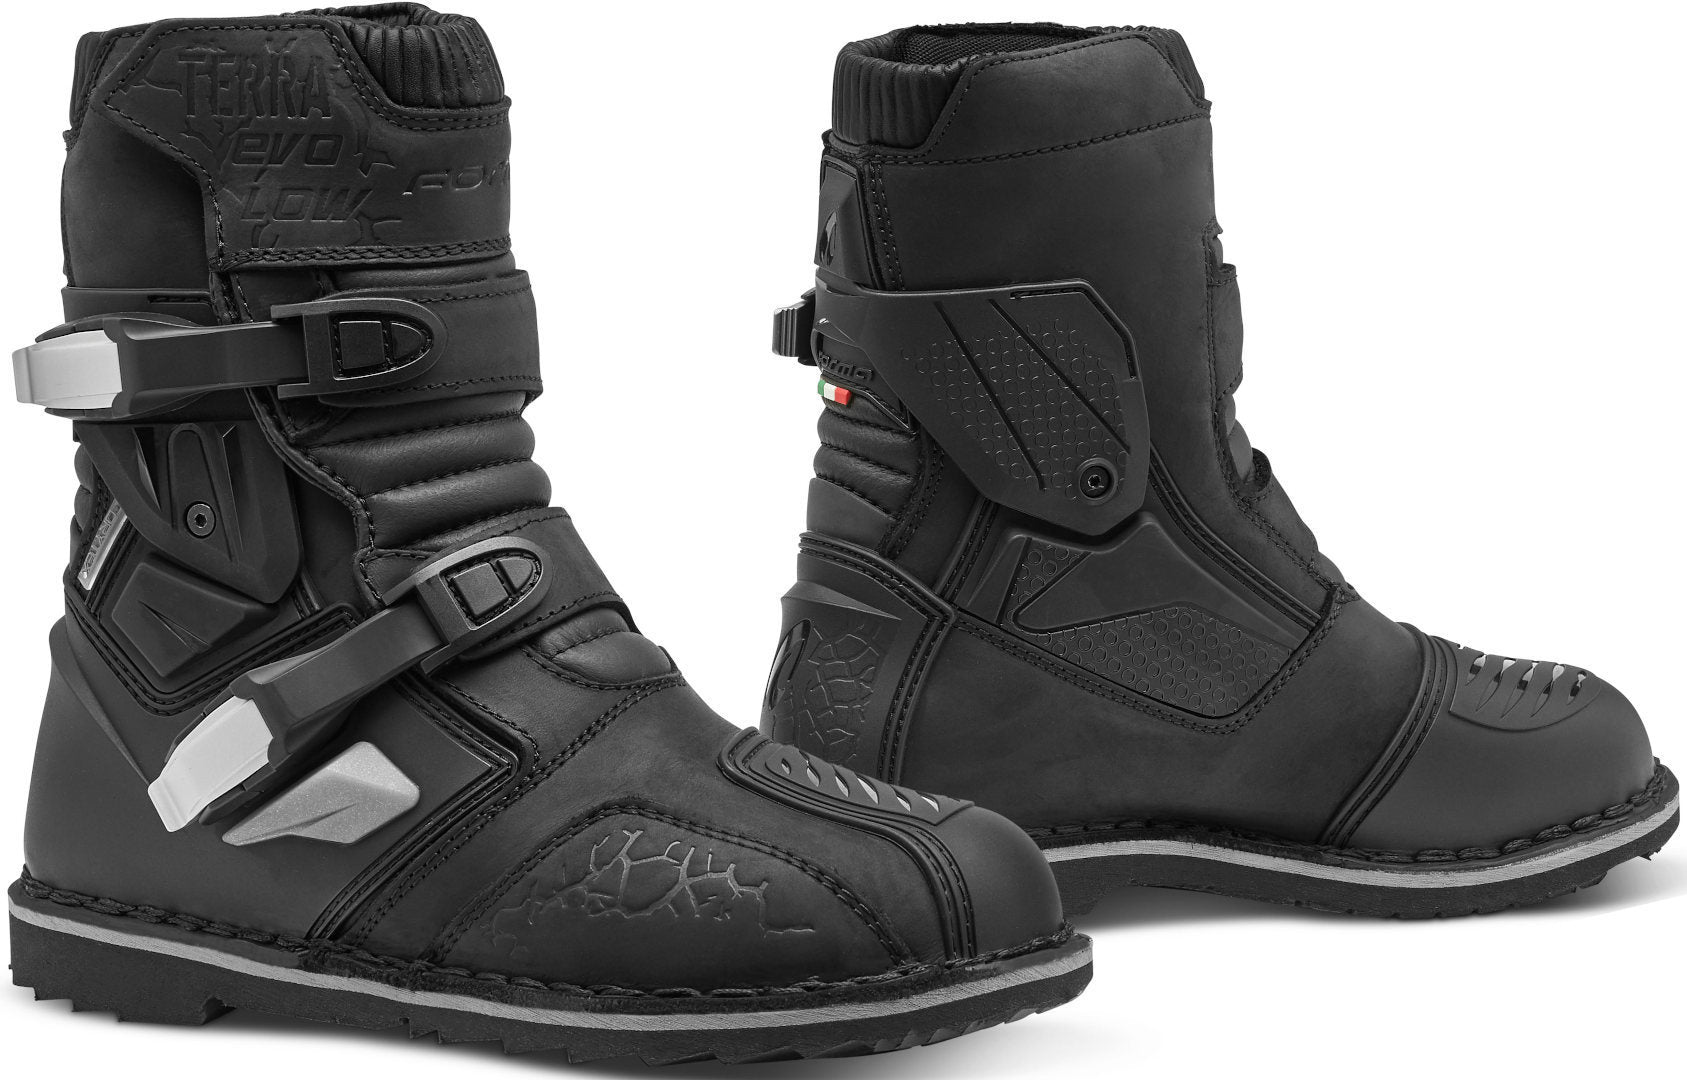 Buy Forma Terra EVO Low Boots Online with Free Shipping 